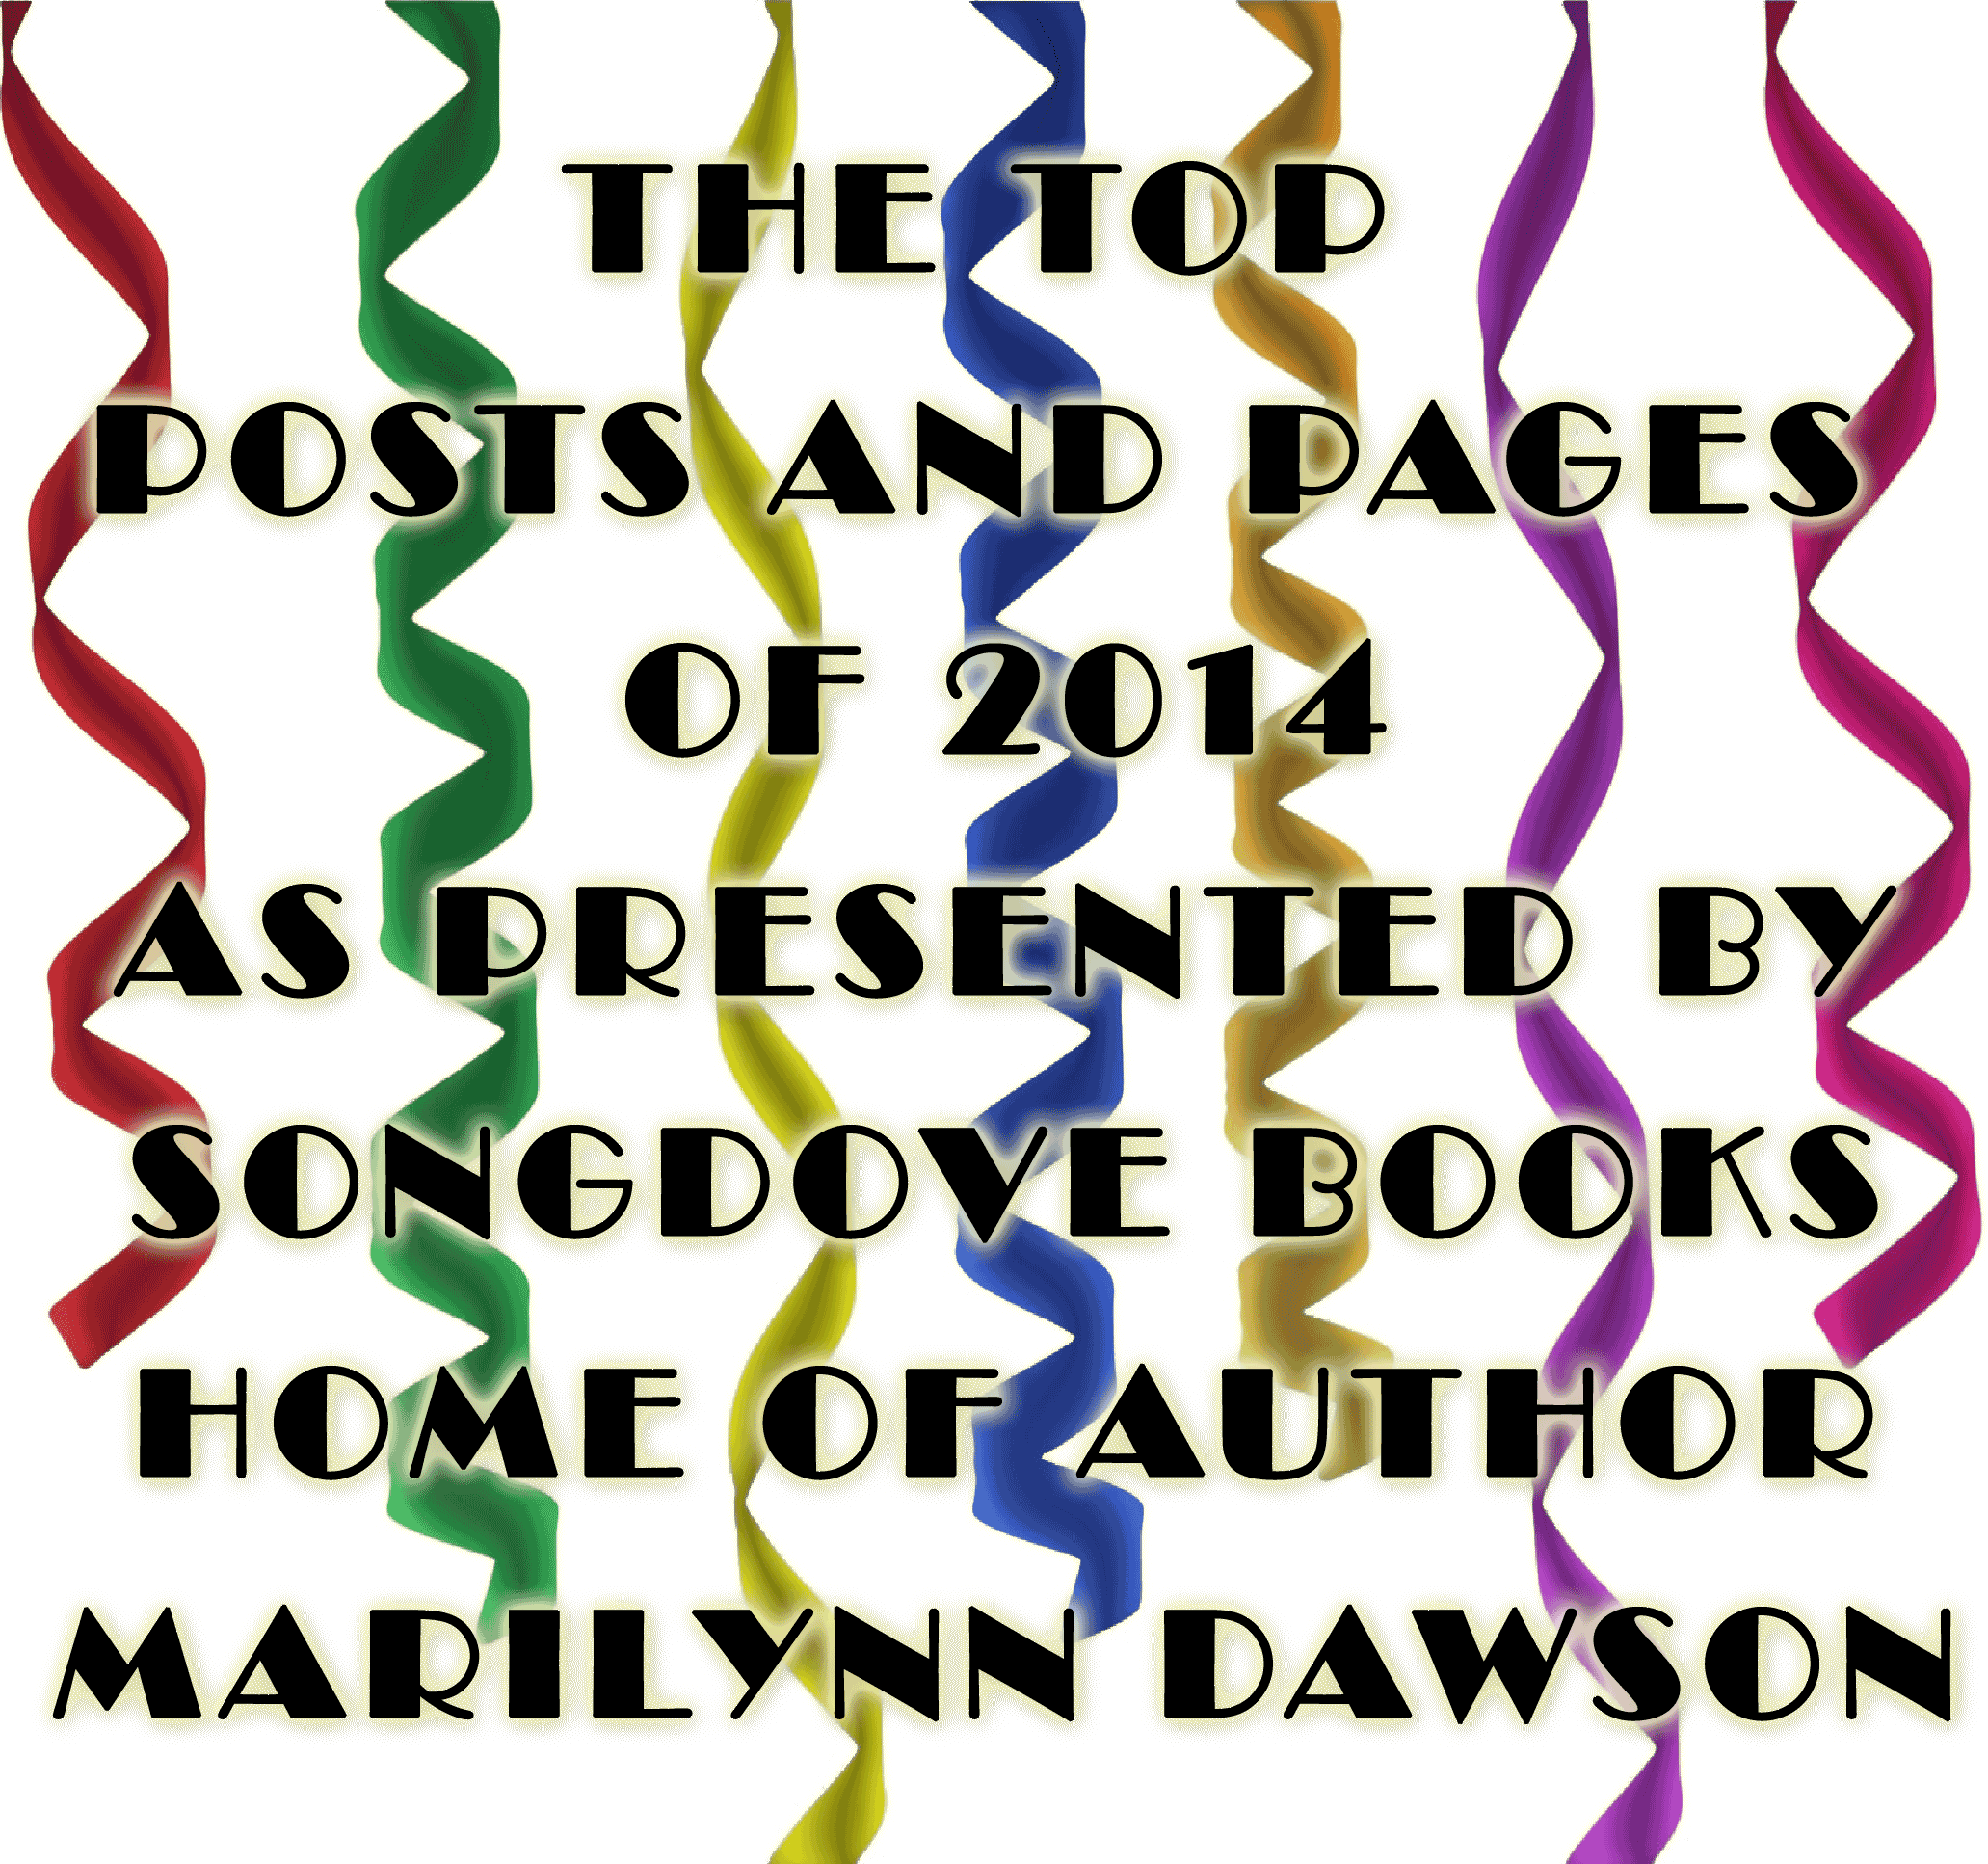 Songdove Books Top 10 Posts & Pages for 2014